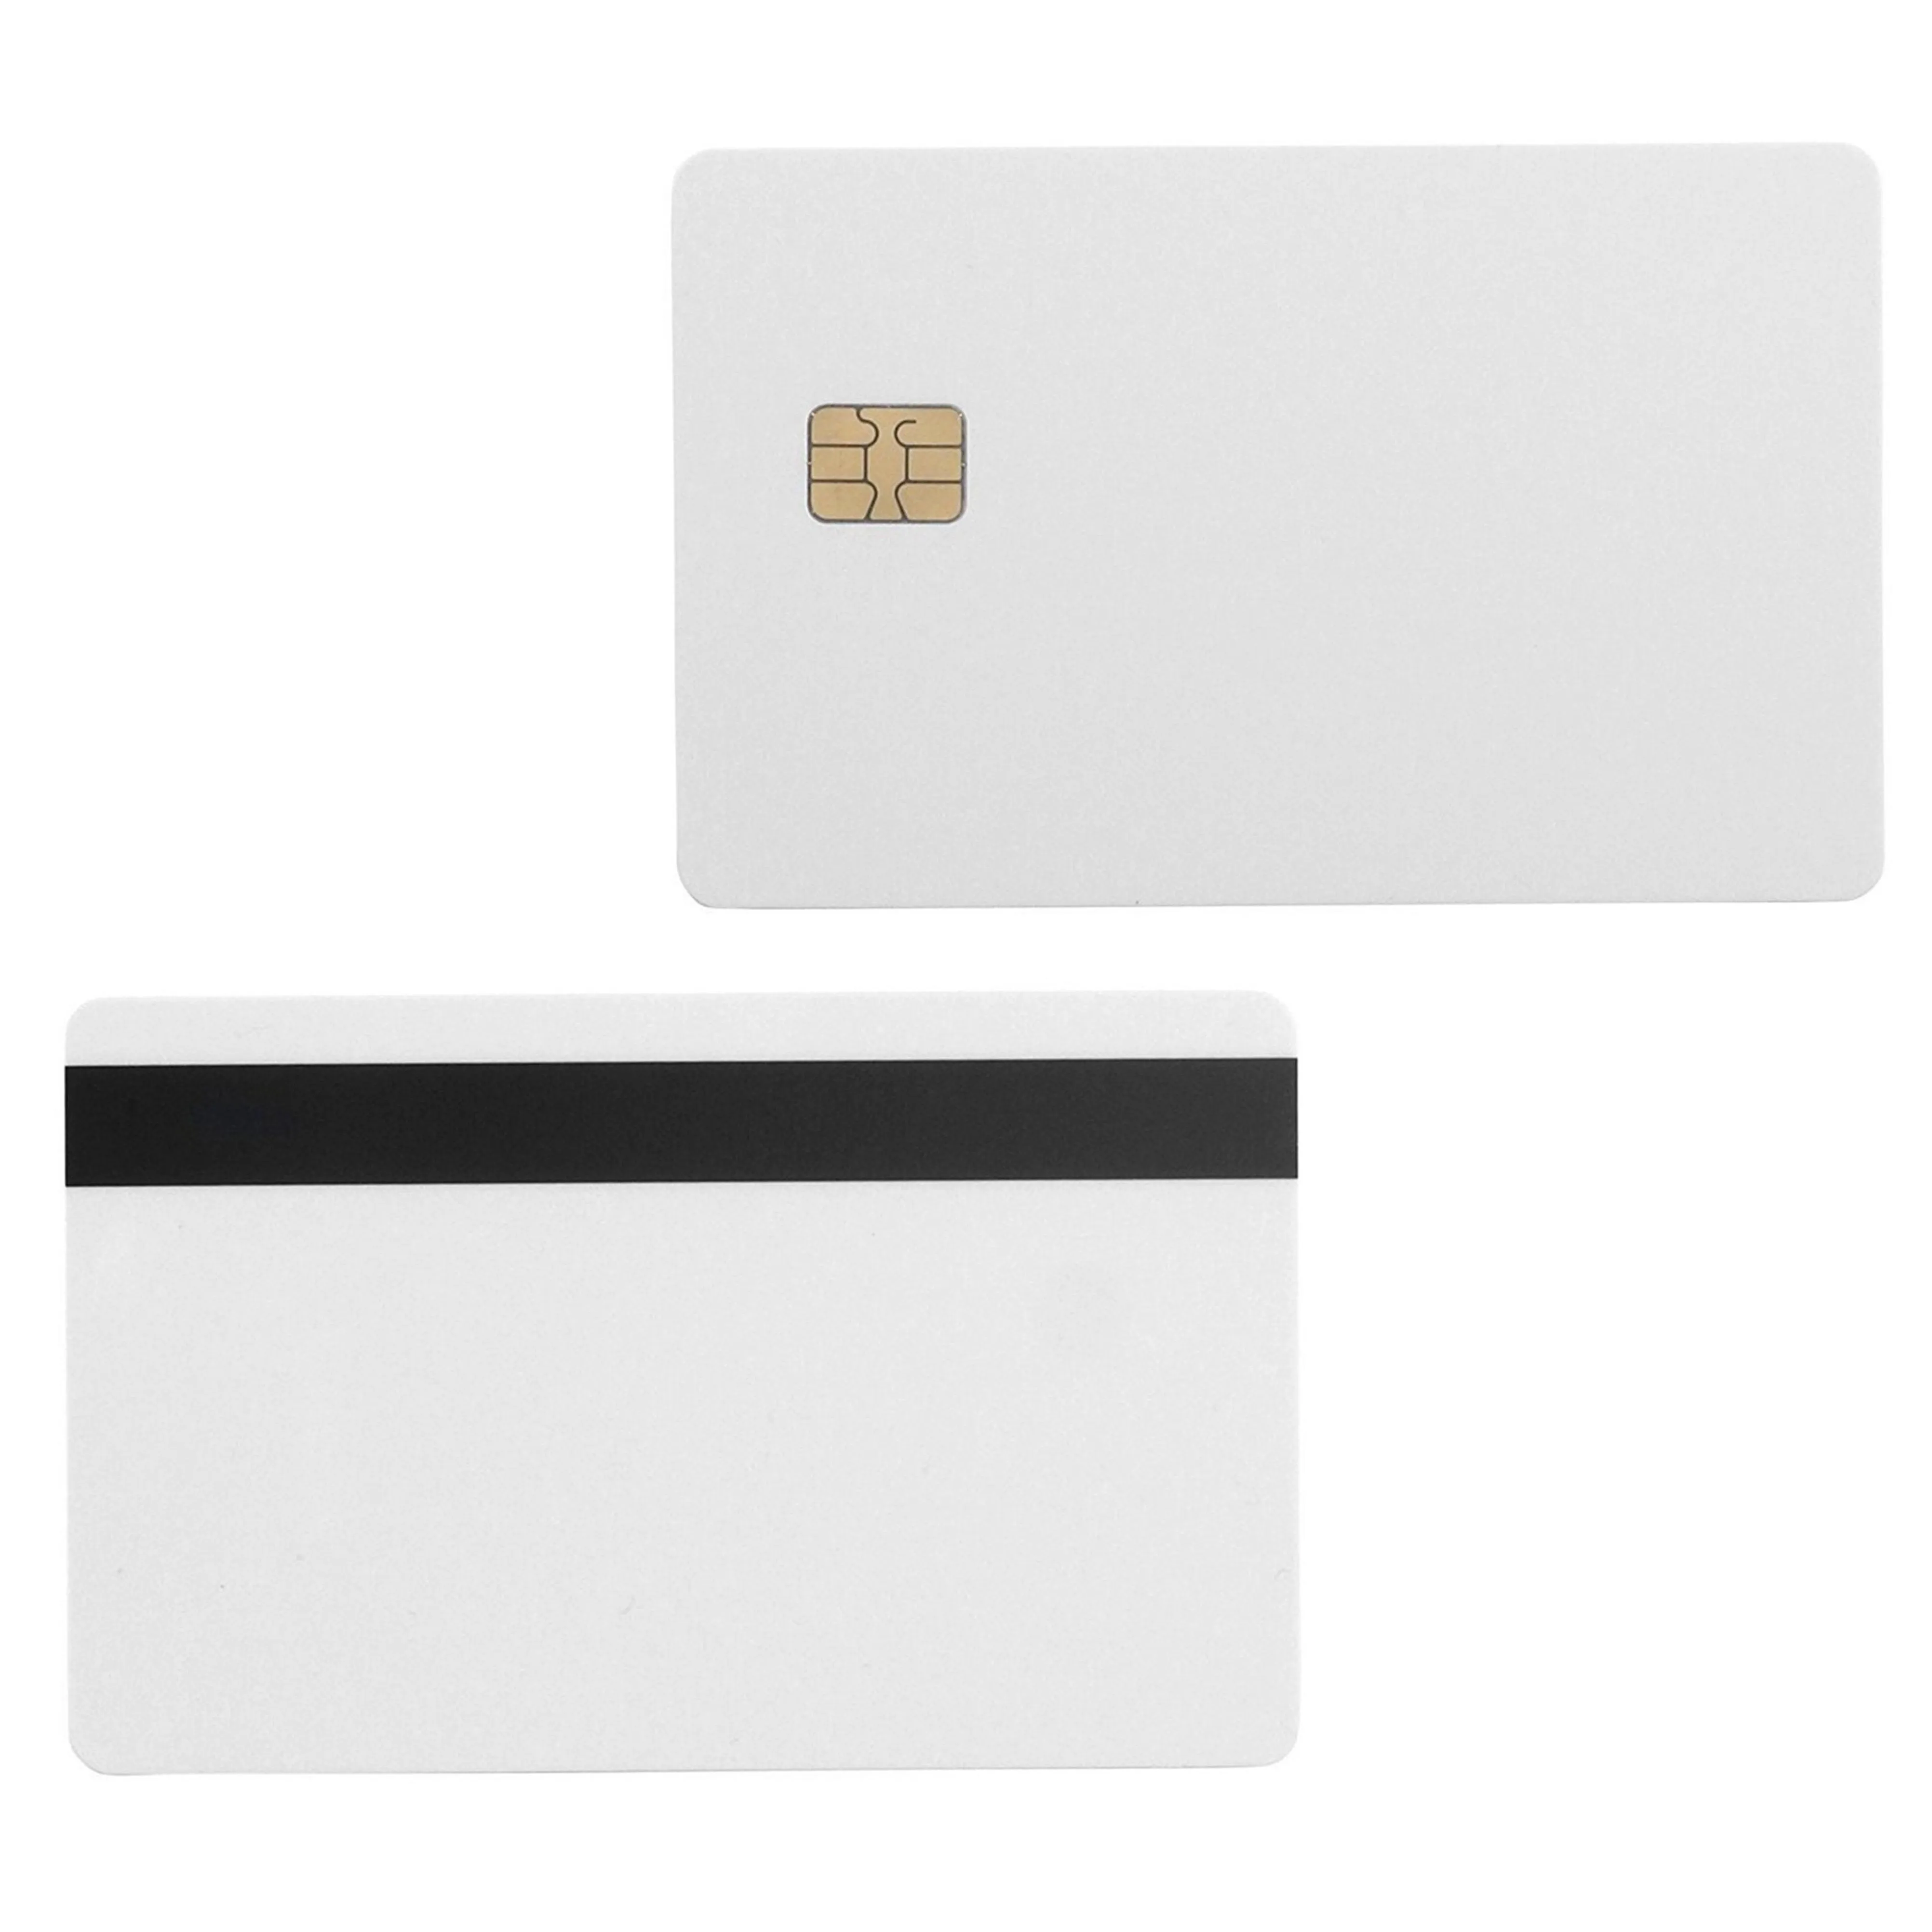 10pcs white sle4442 contact chip pvc smart card with 8.4mm hico magnetic stripe